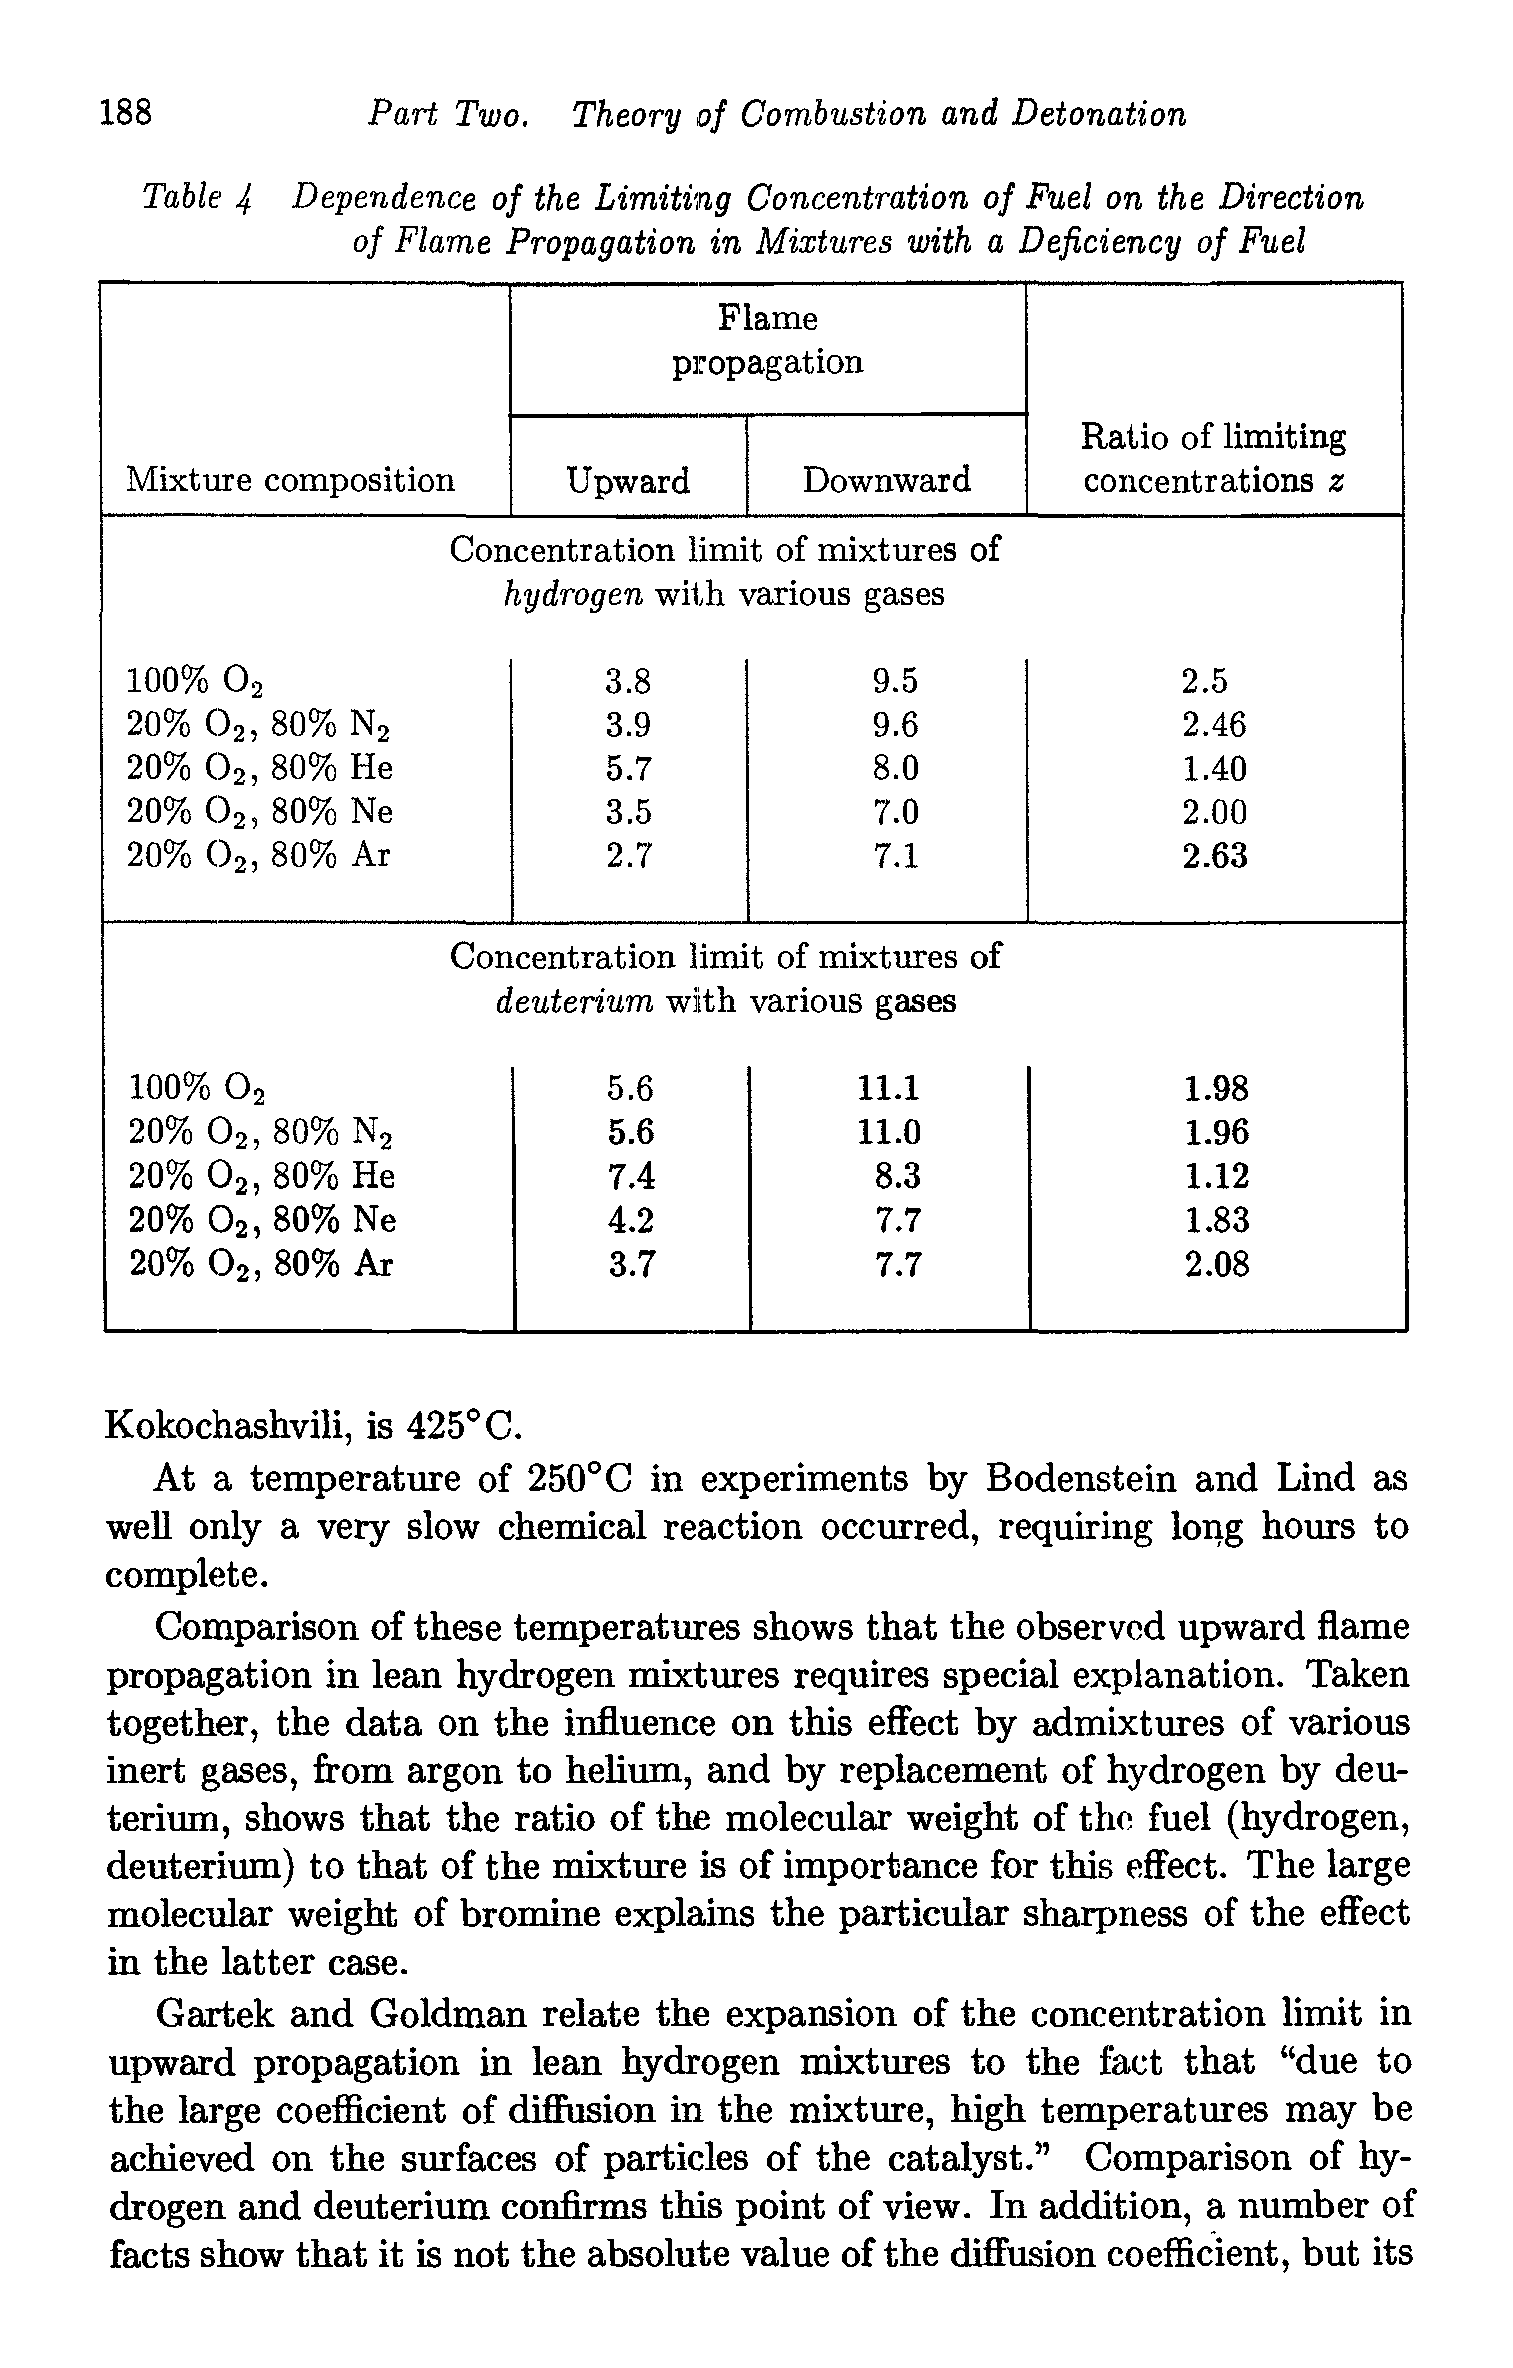 Table 4 Dependence of the Limiting Concentration of Fuel on the Direction of Flame Propagation in Mixtures with a Deficiency of Fuel...